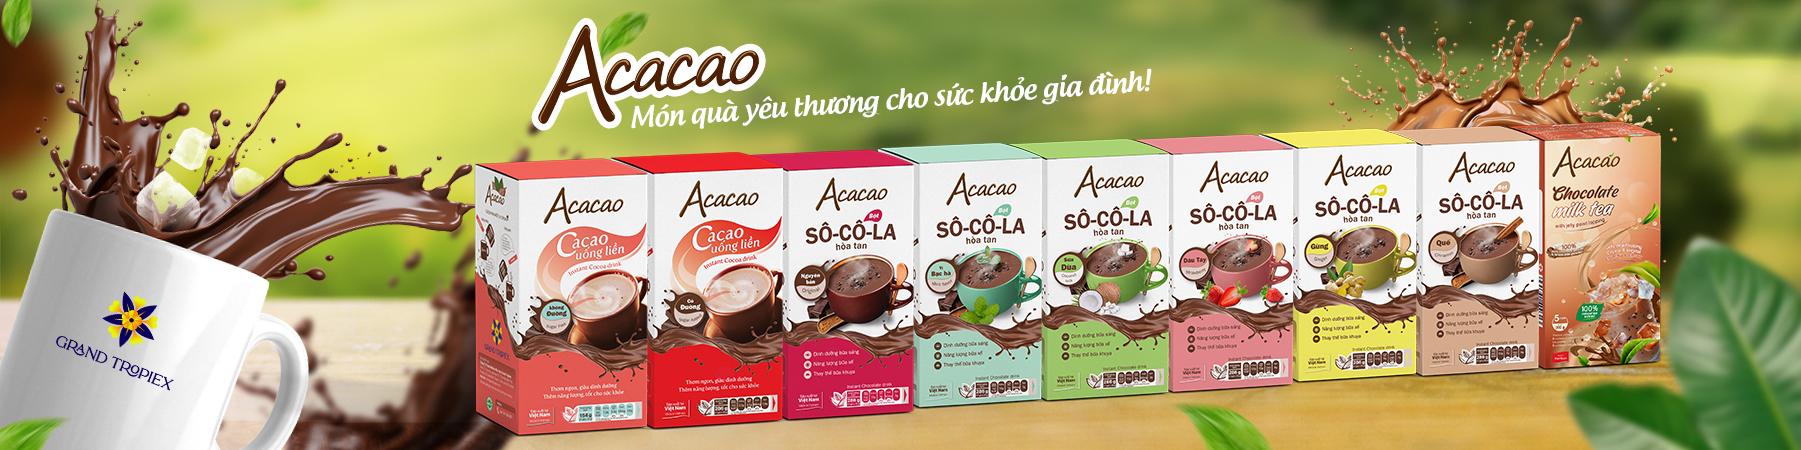 Cacao uống liền